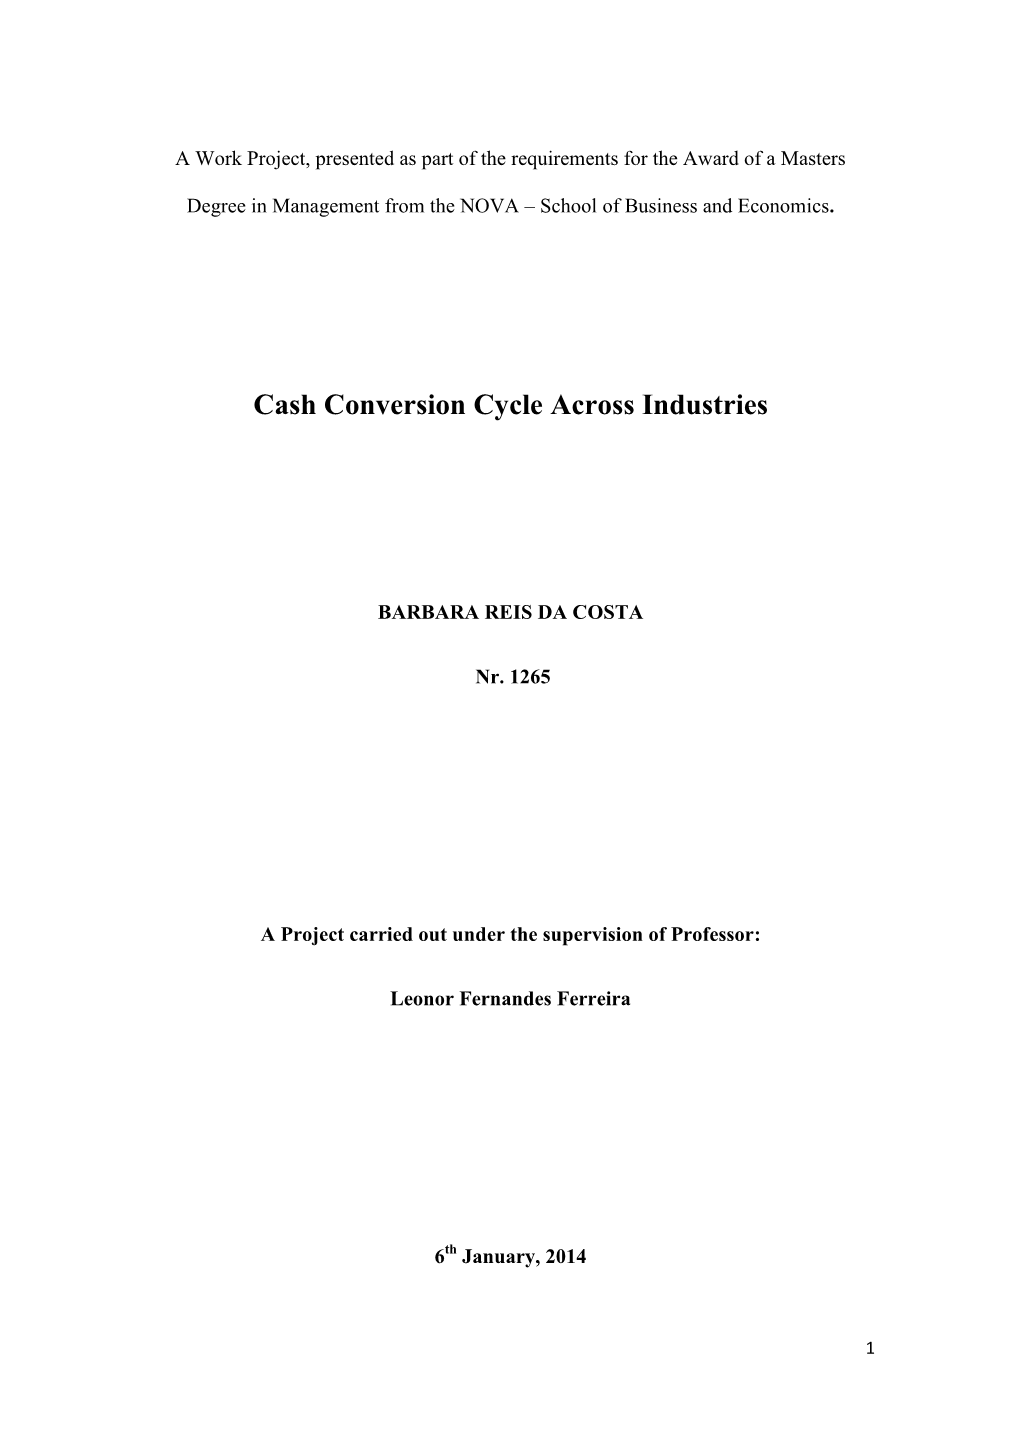 Cash Conversion Cycle Across Industries